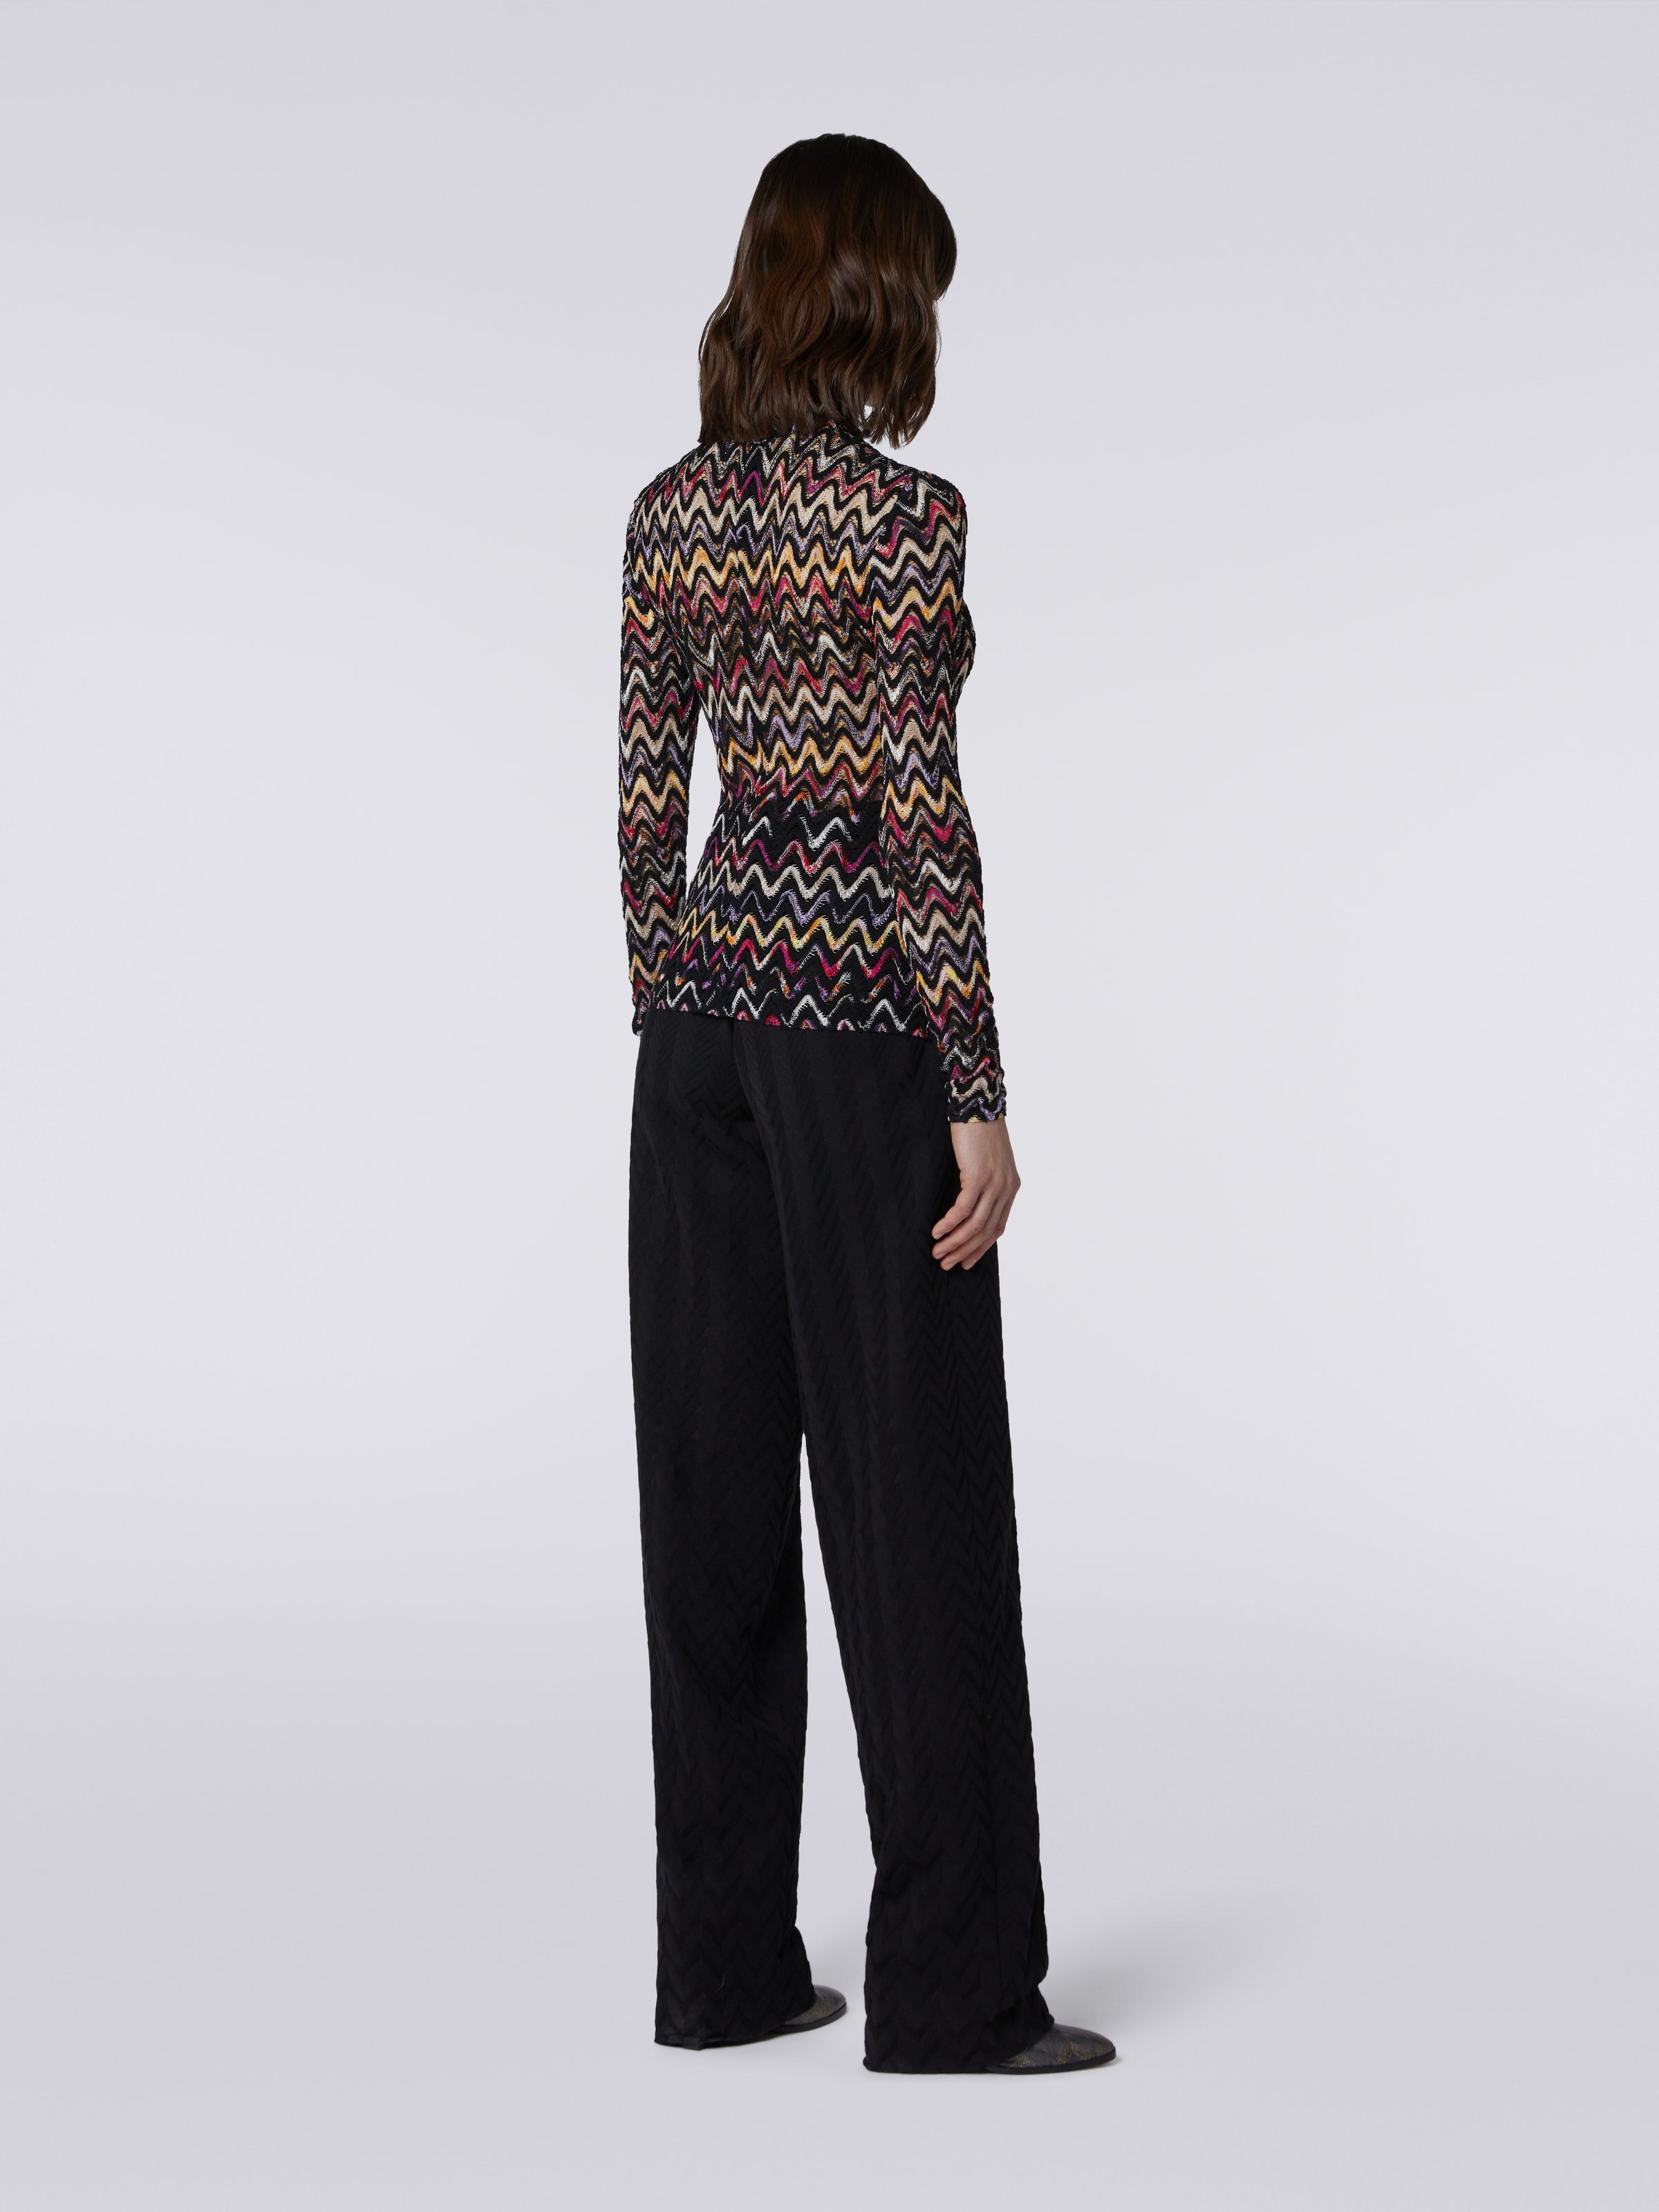 High-neck jumper in raschel knit wool and viscose, Multicoloured  - 3